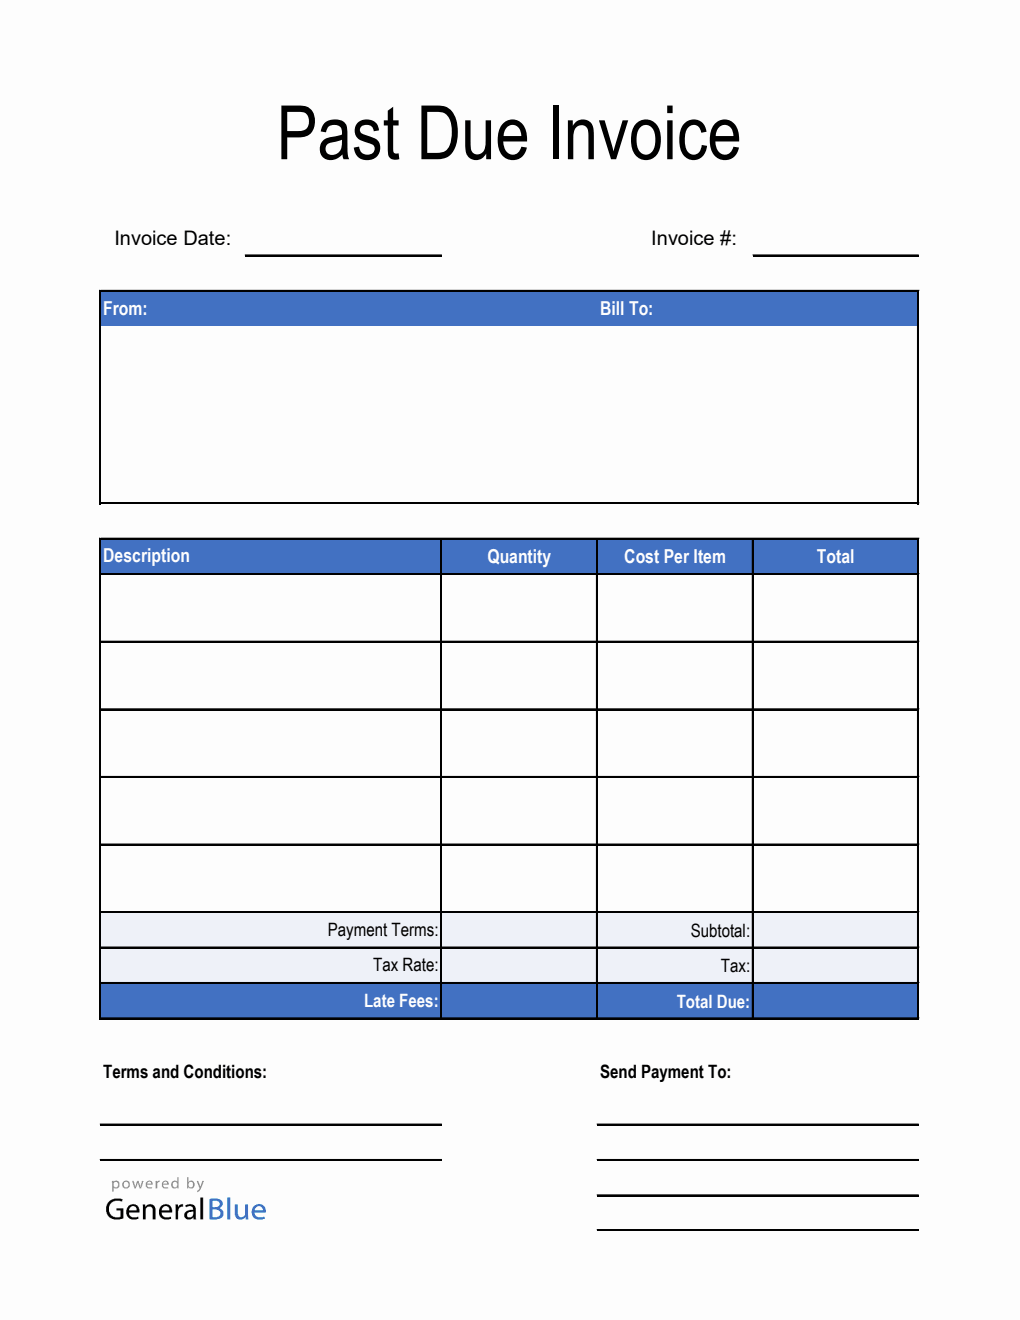 Past Due Invoice in Excel (Simple)